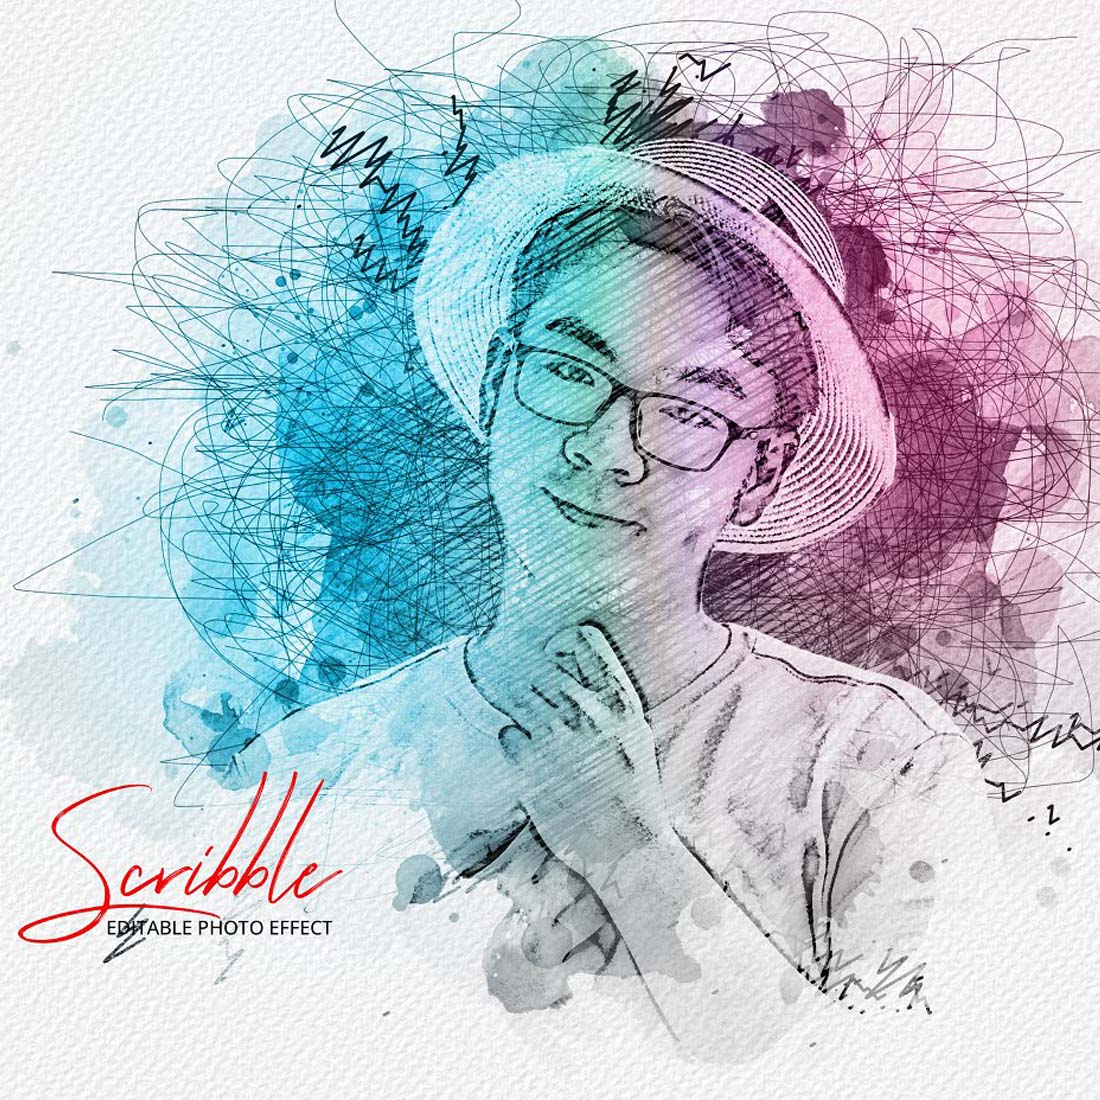 Colorful Photo Effect Scribble Art preview image.